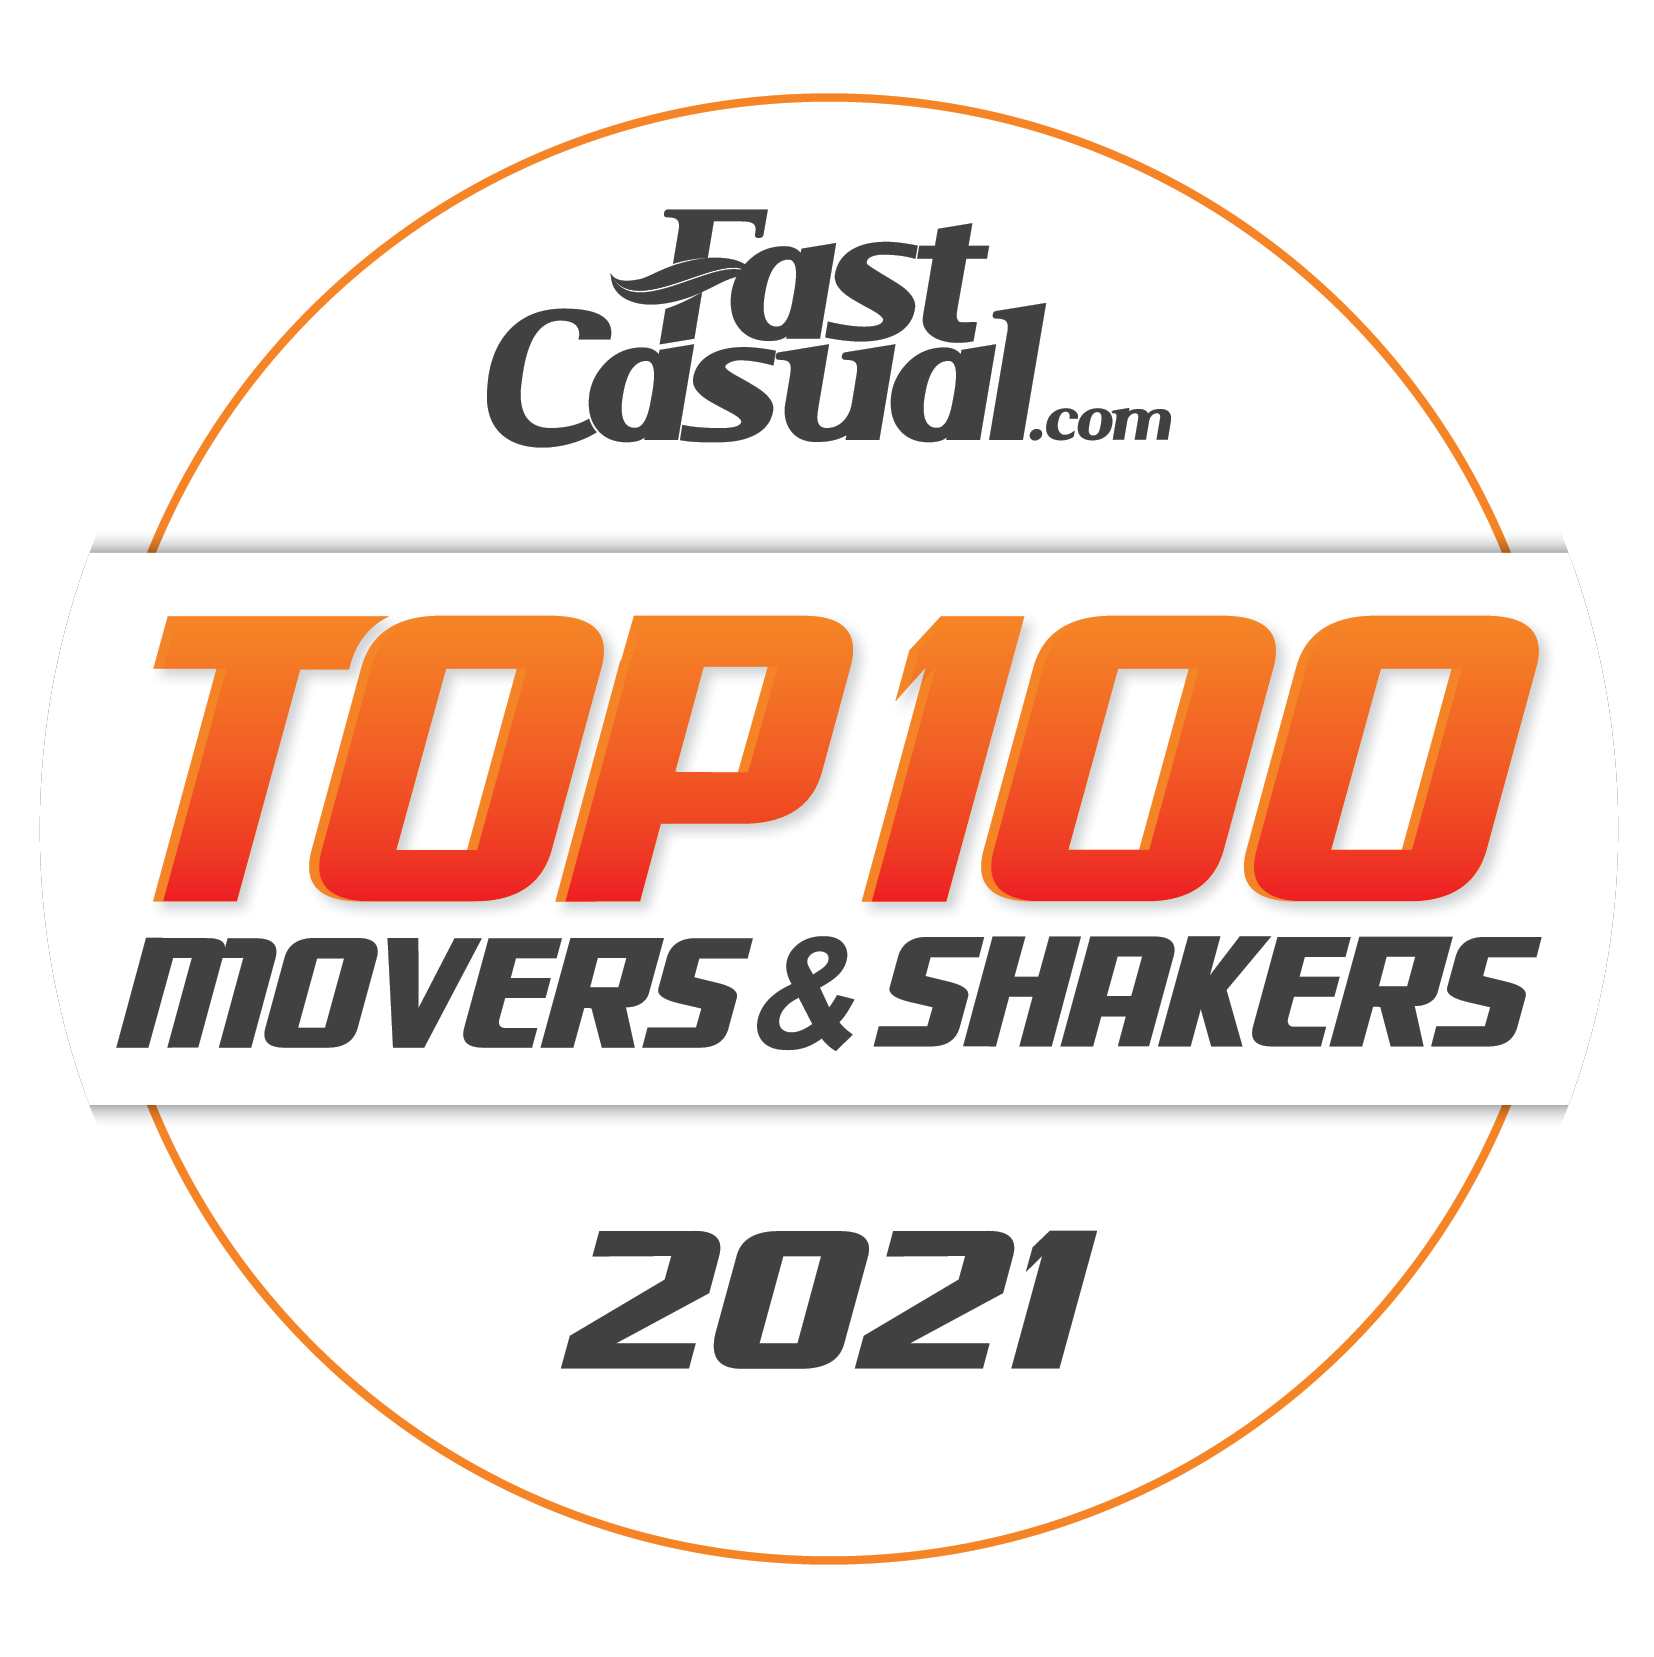 Fast Casual Top 100 Movers & Shakers 2021